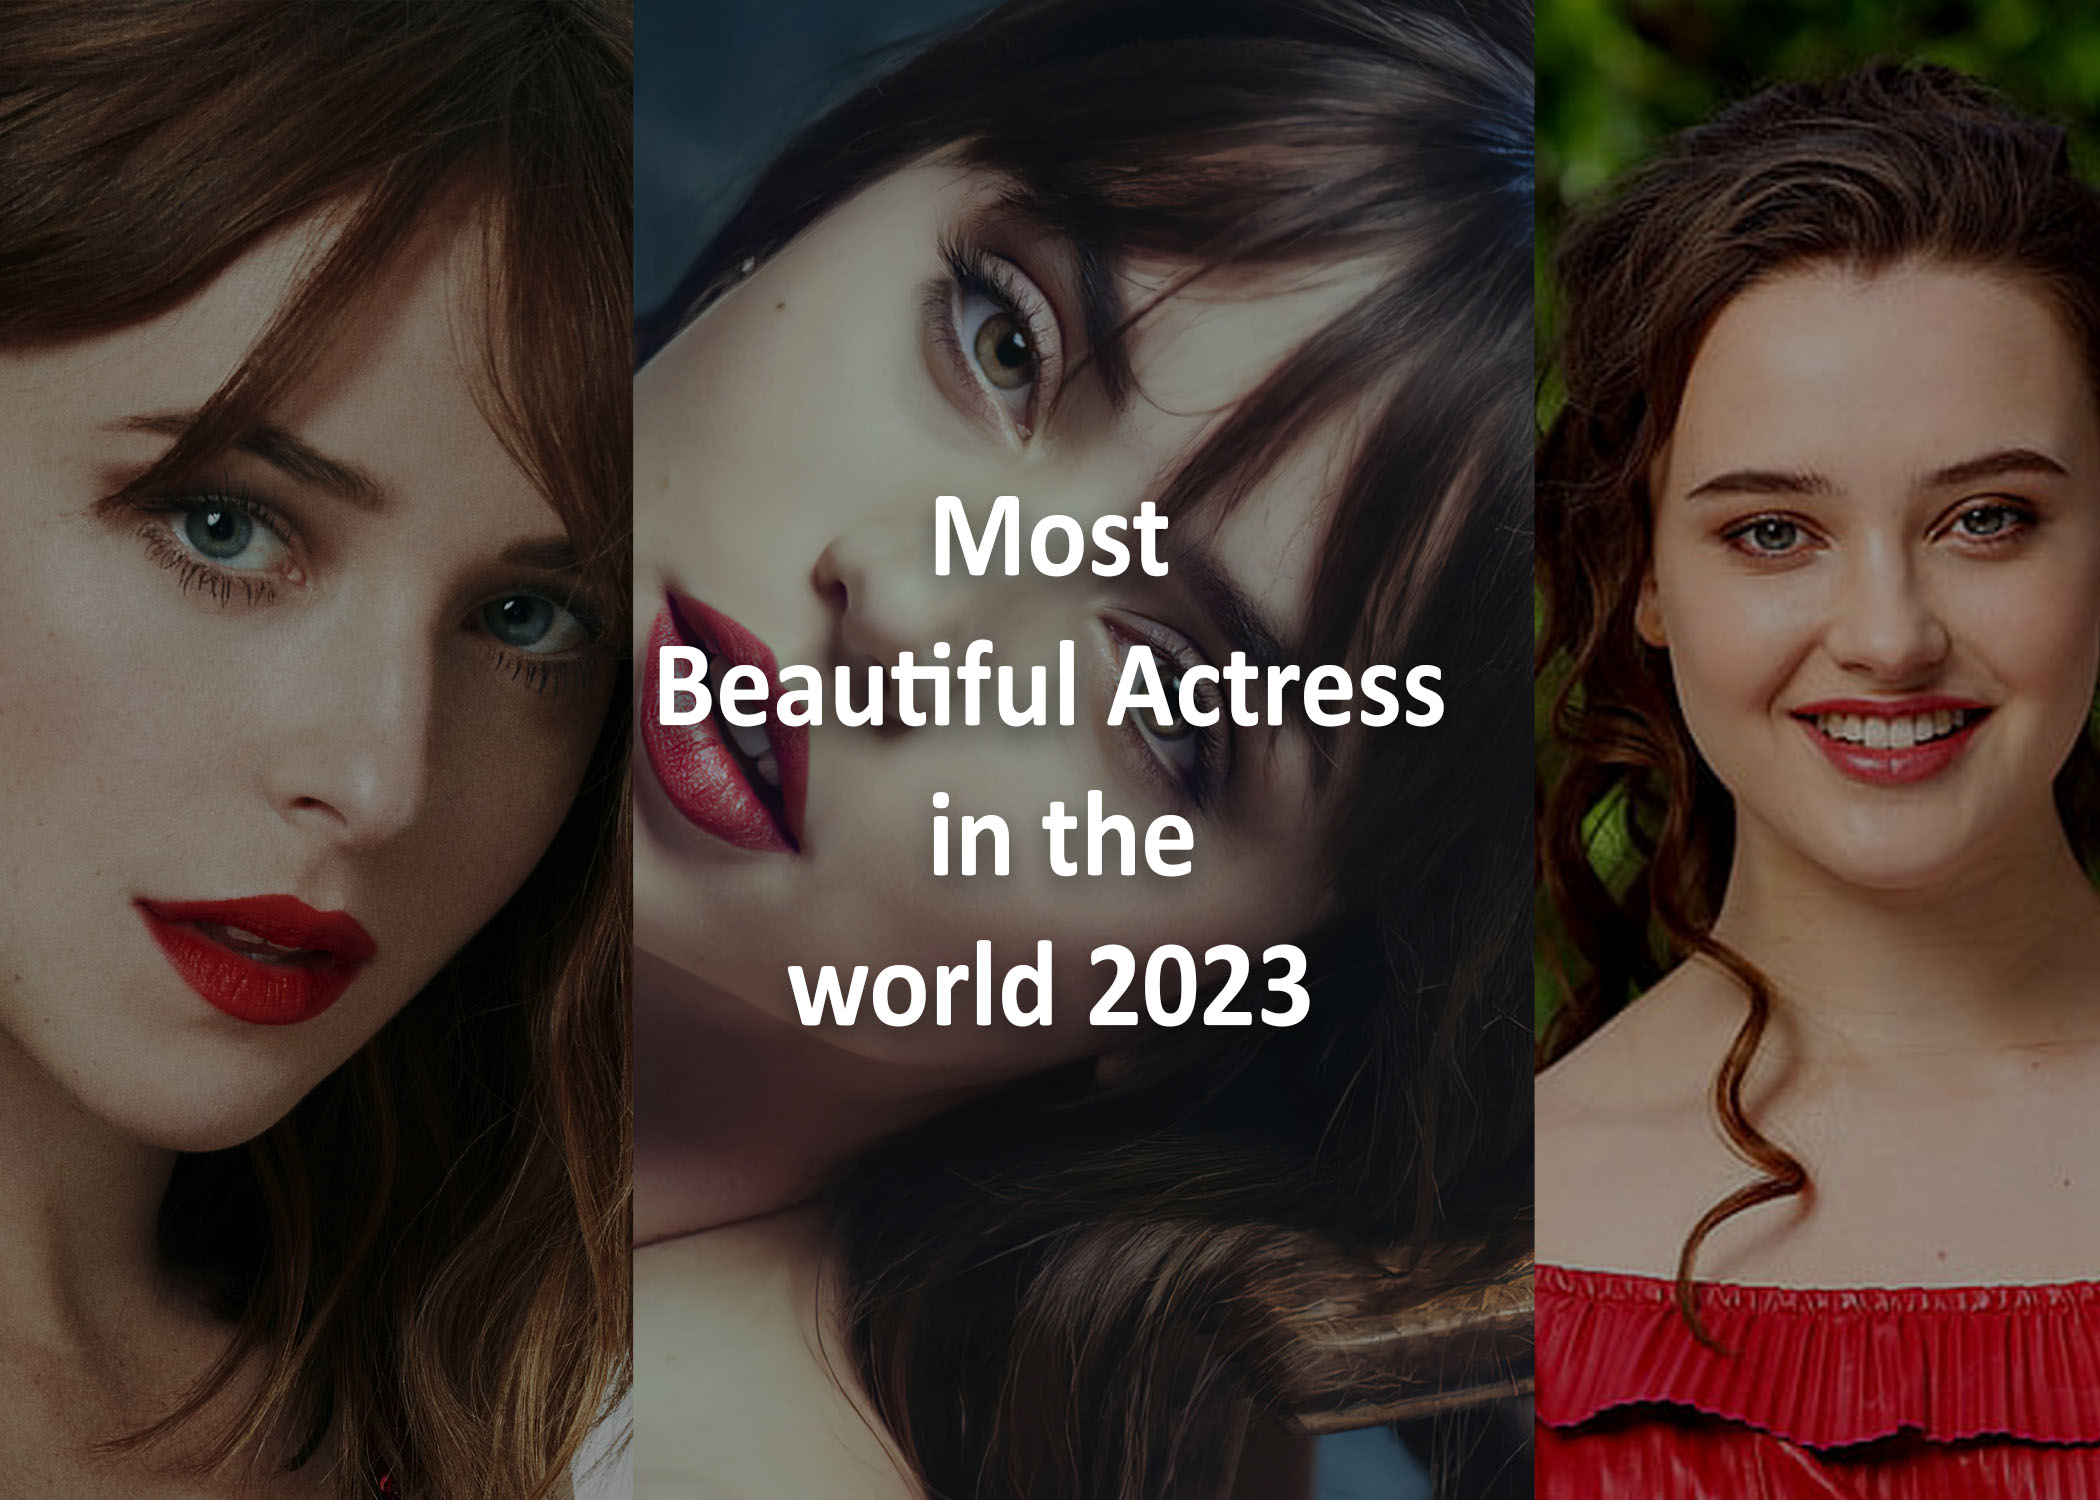 Top 10 Most Beautiful Actress in the world 2023